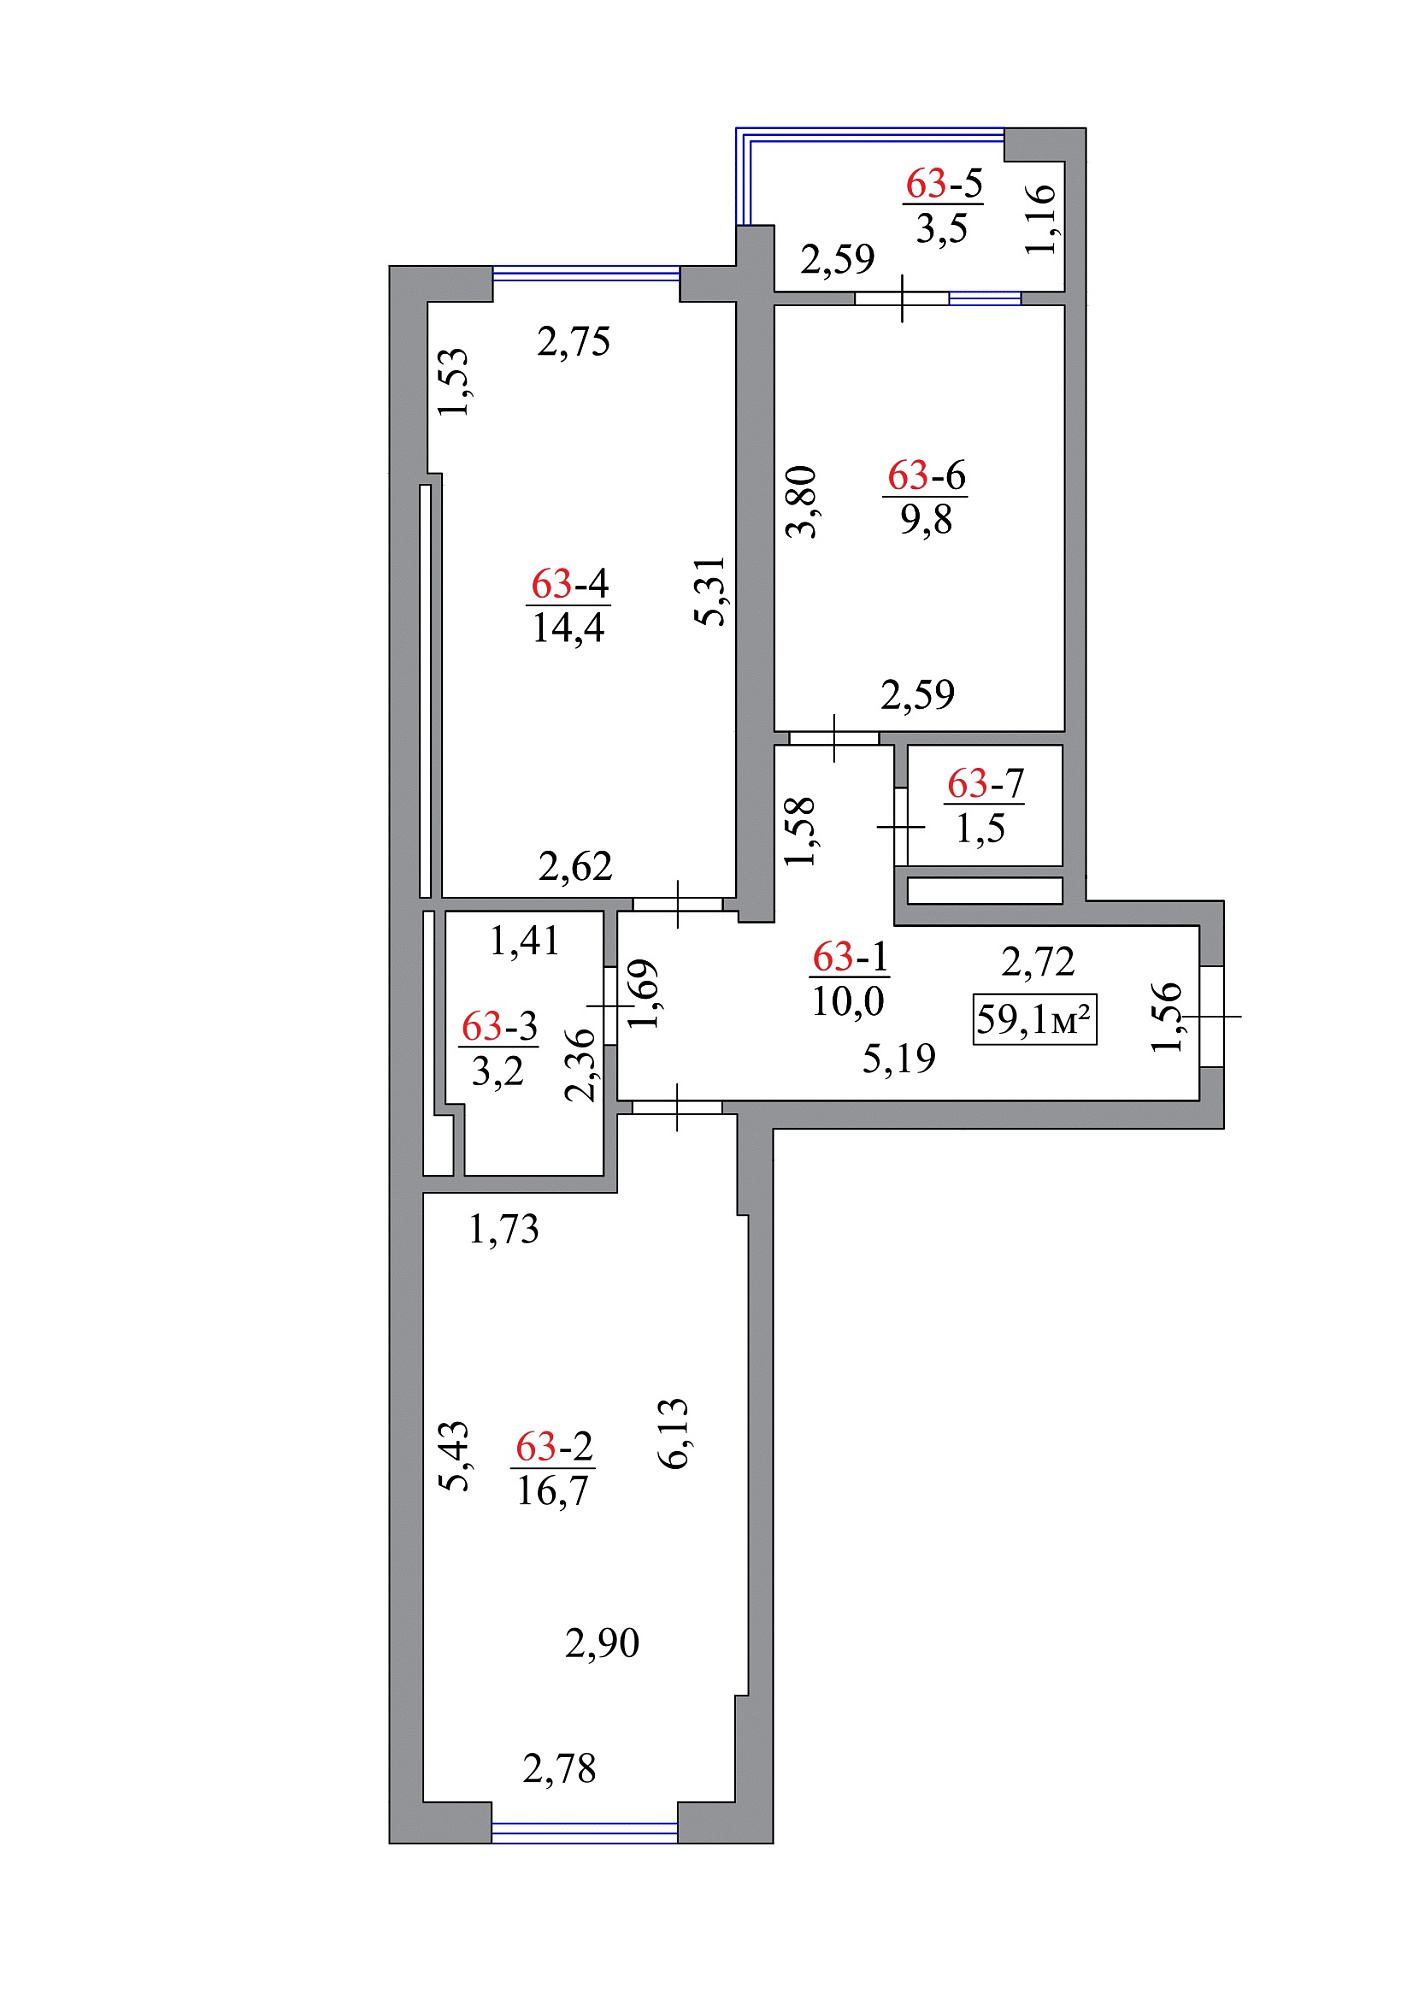 Planning 2-rm flats area 59.1m2, AB-07-07/00057.